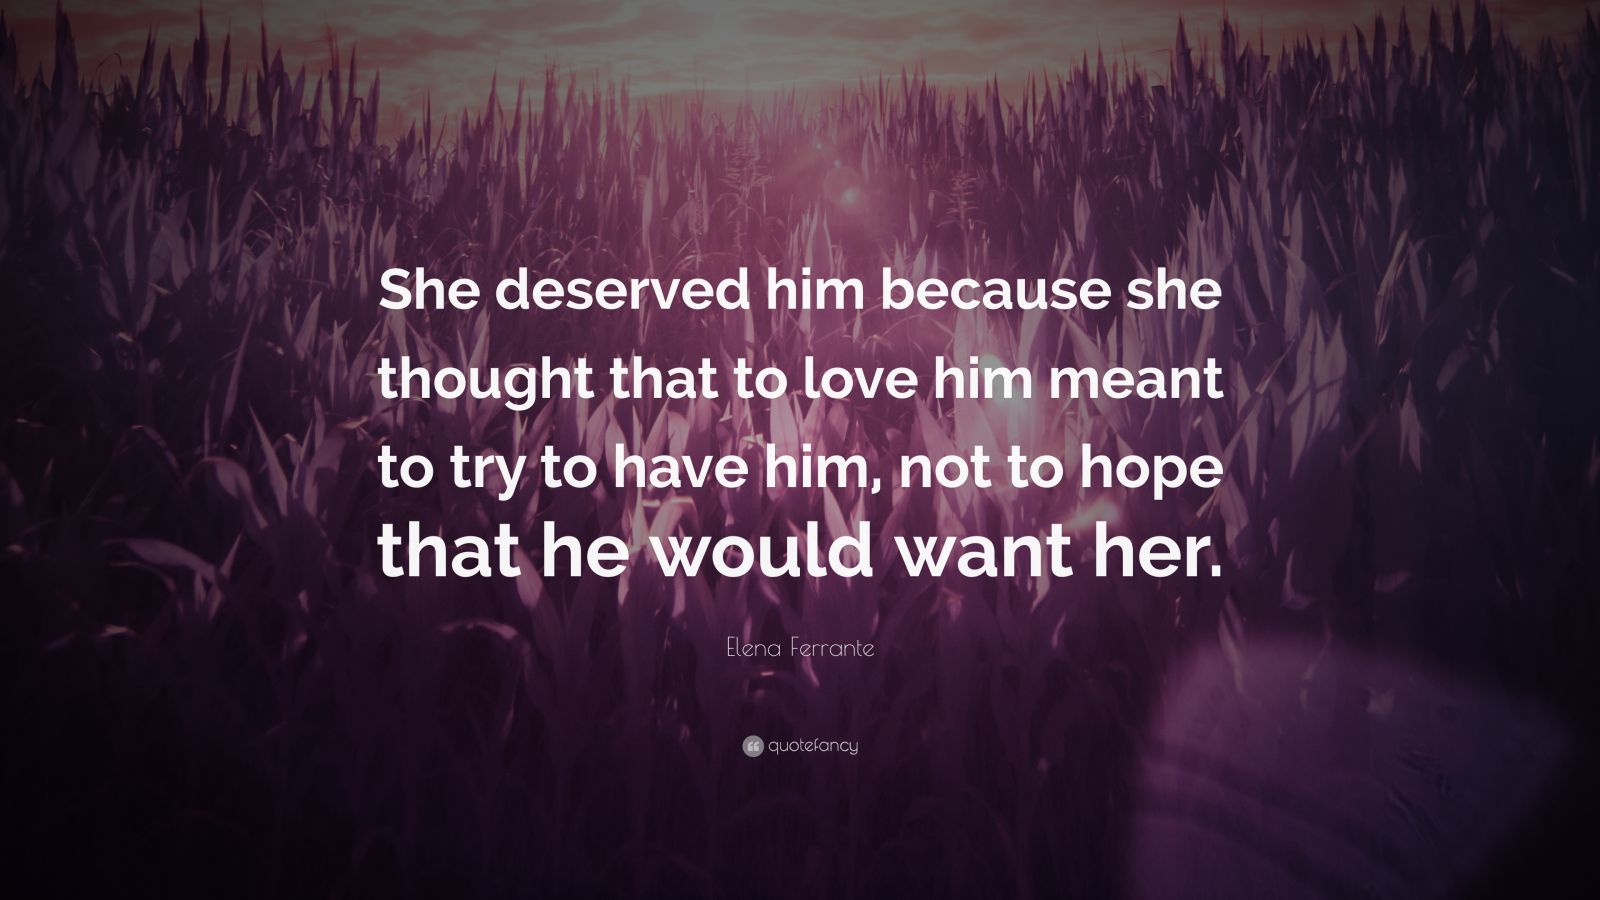 Elena Ferrante Quote: “She deserved him because she thought that to ...